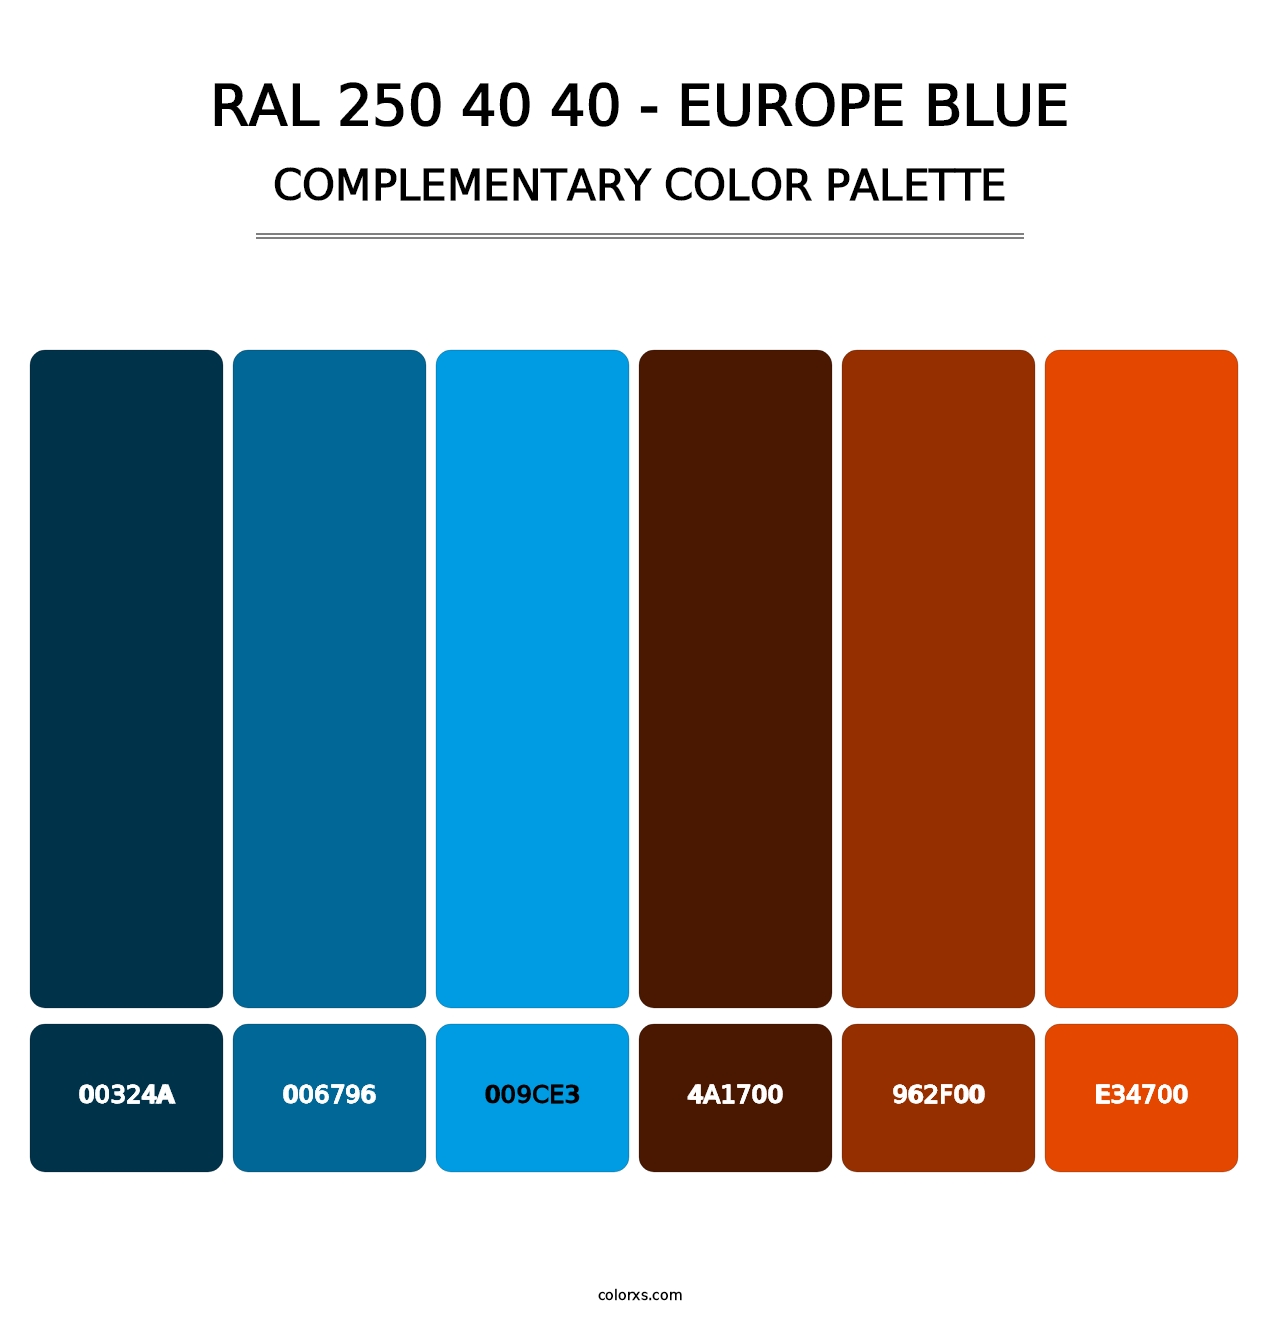 RAL 250 40 40 - Europe Blue - Complementary Color Palette